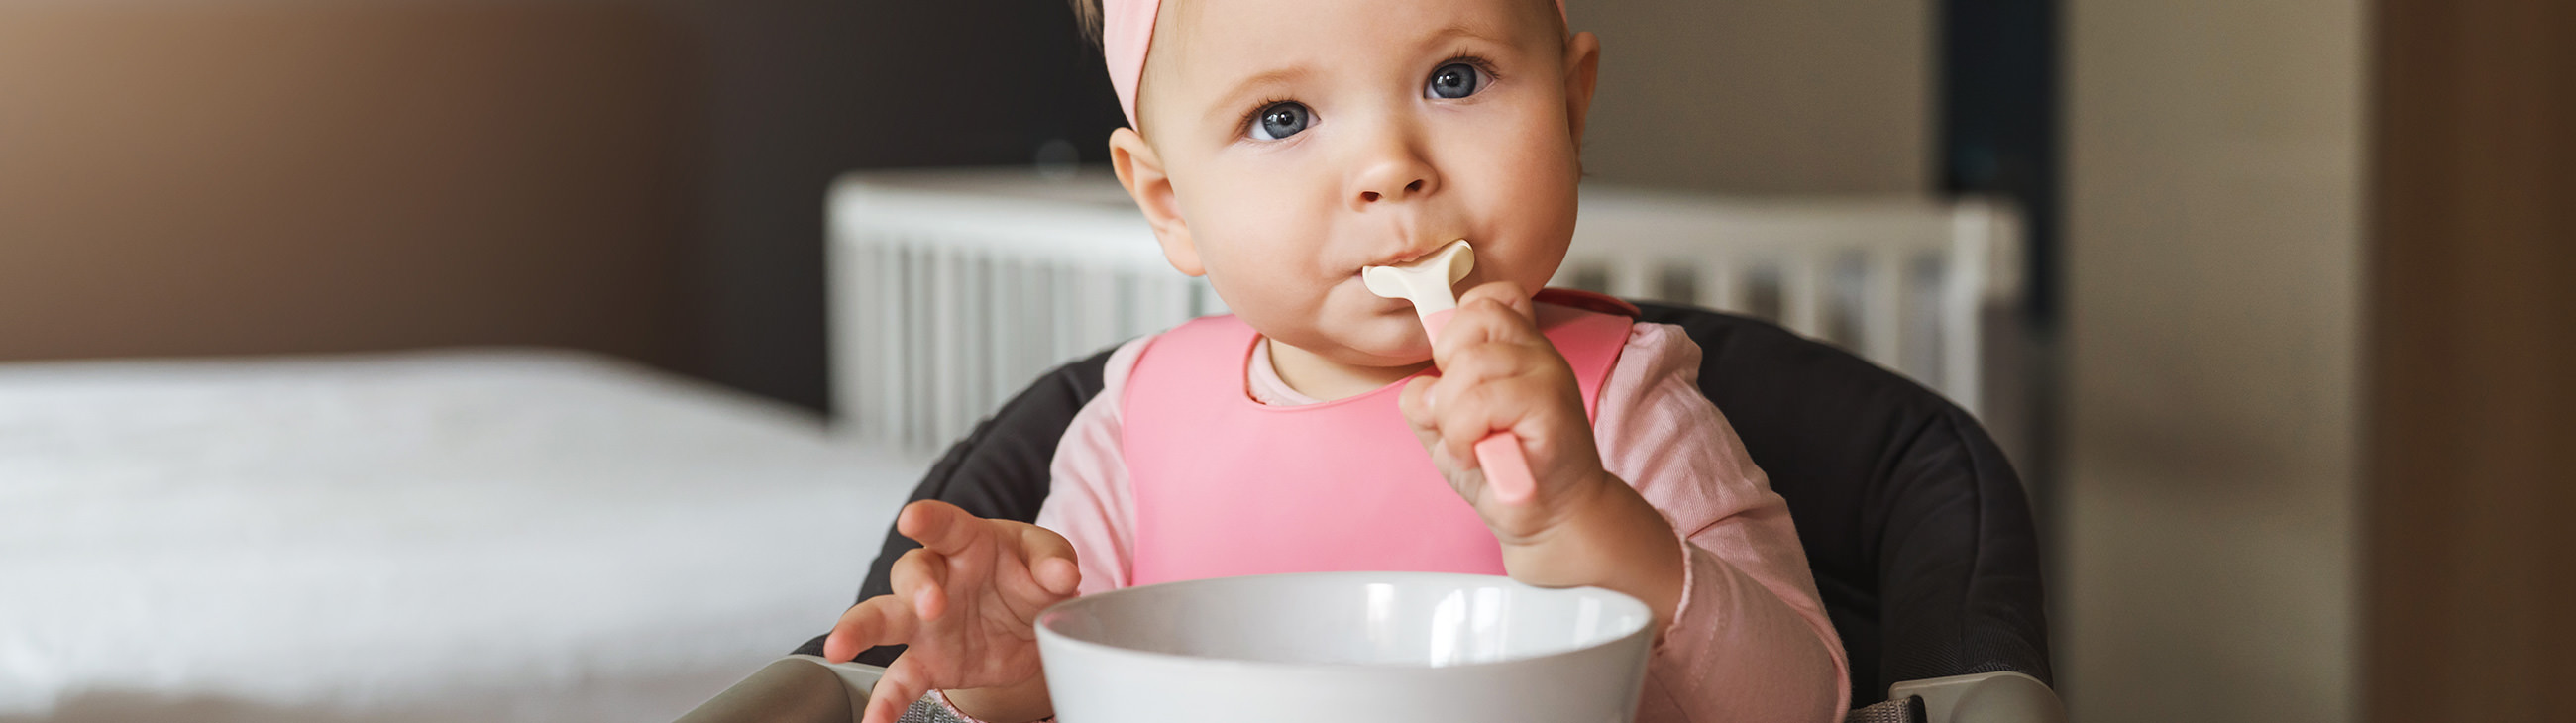 Food diversification for babies at risk for atopy 